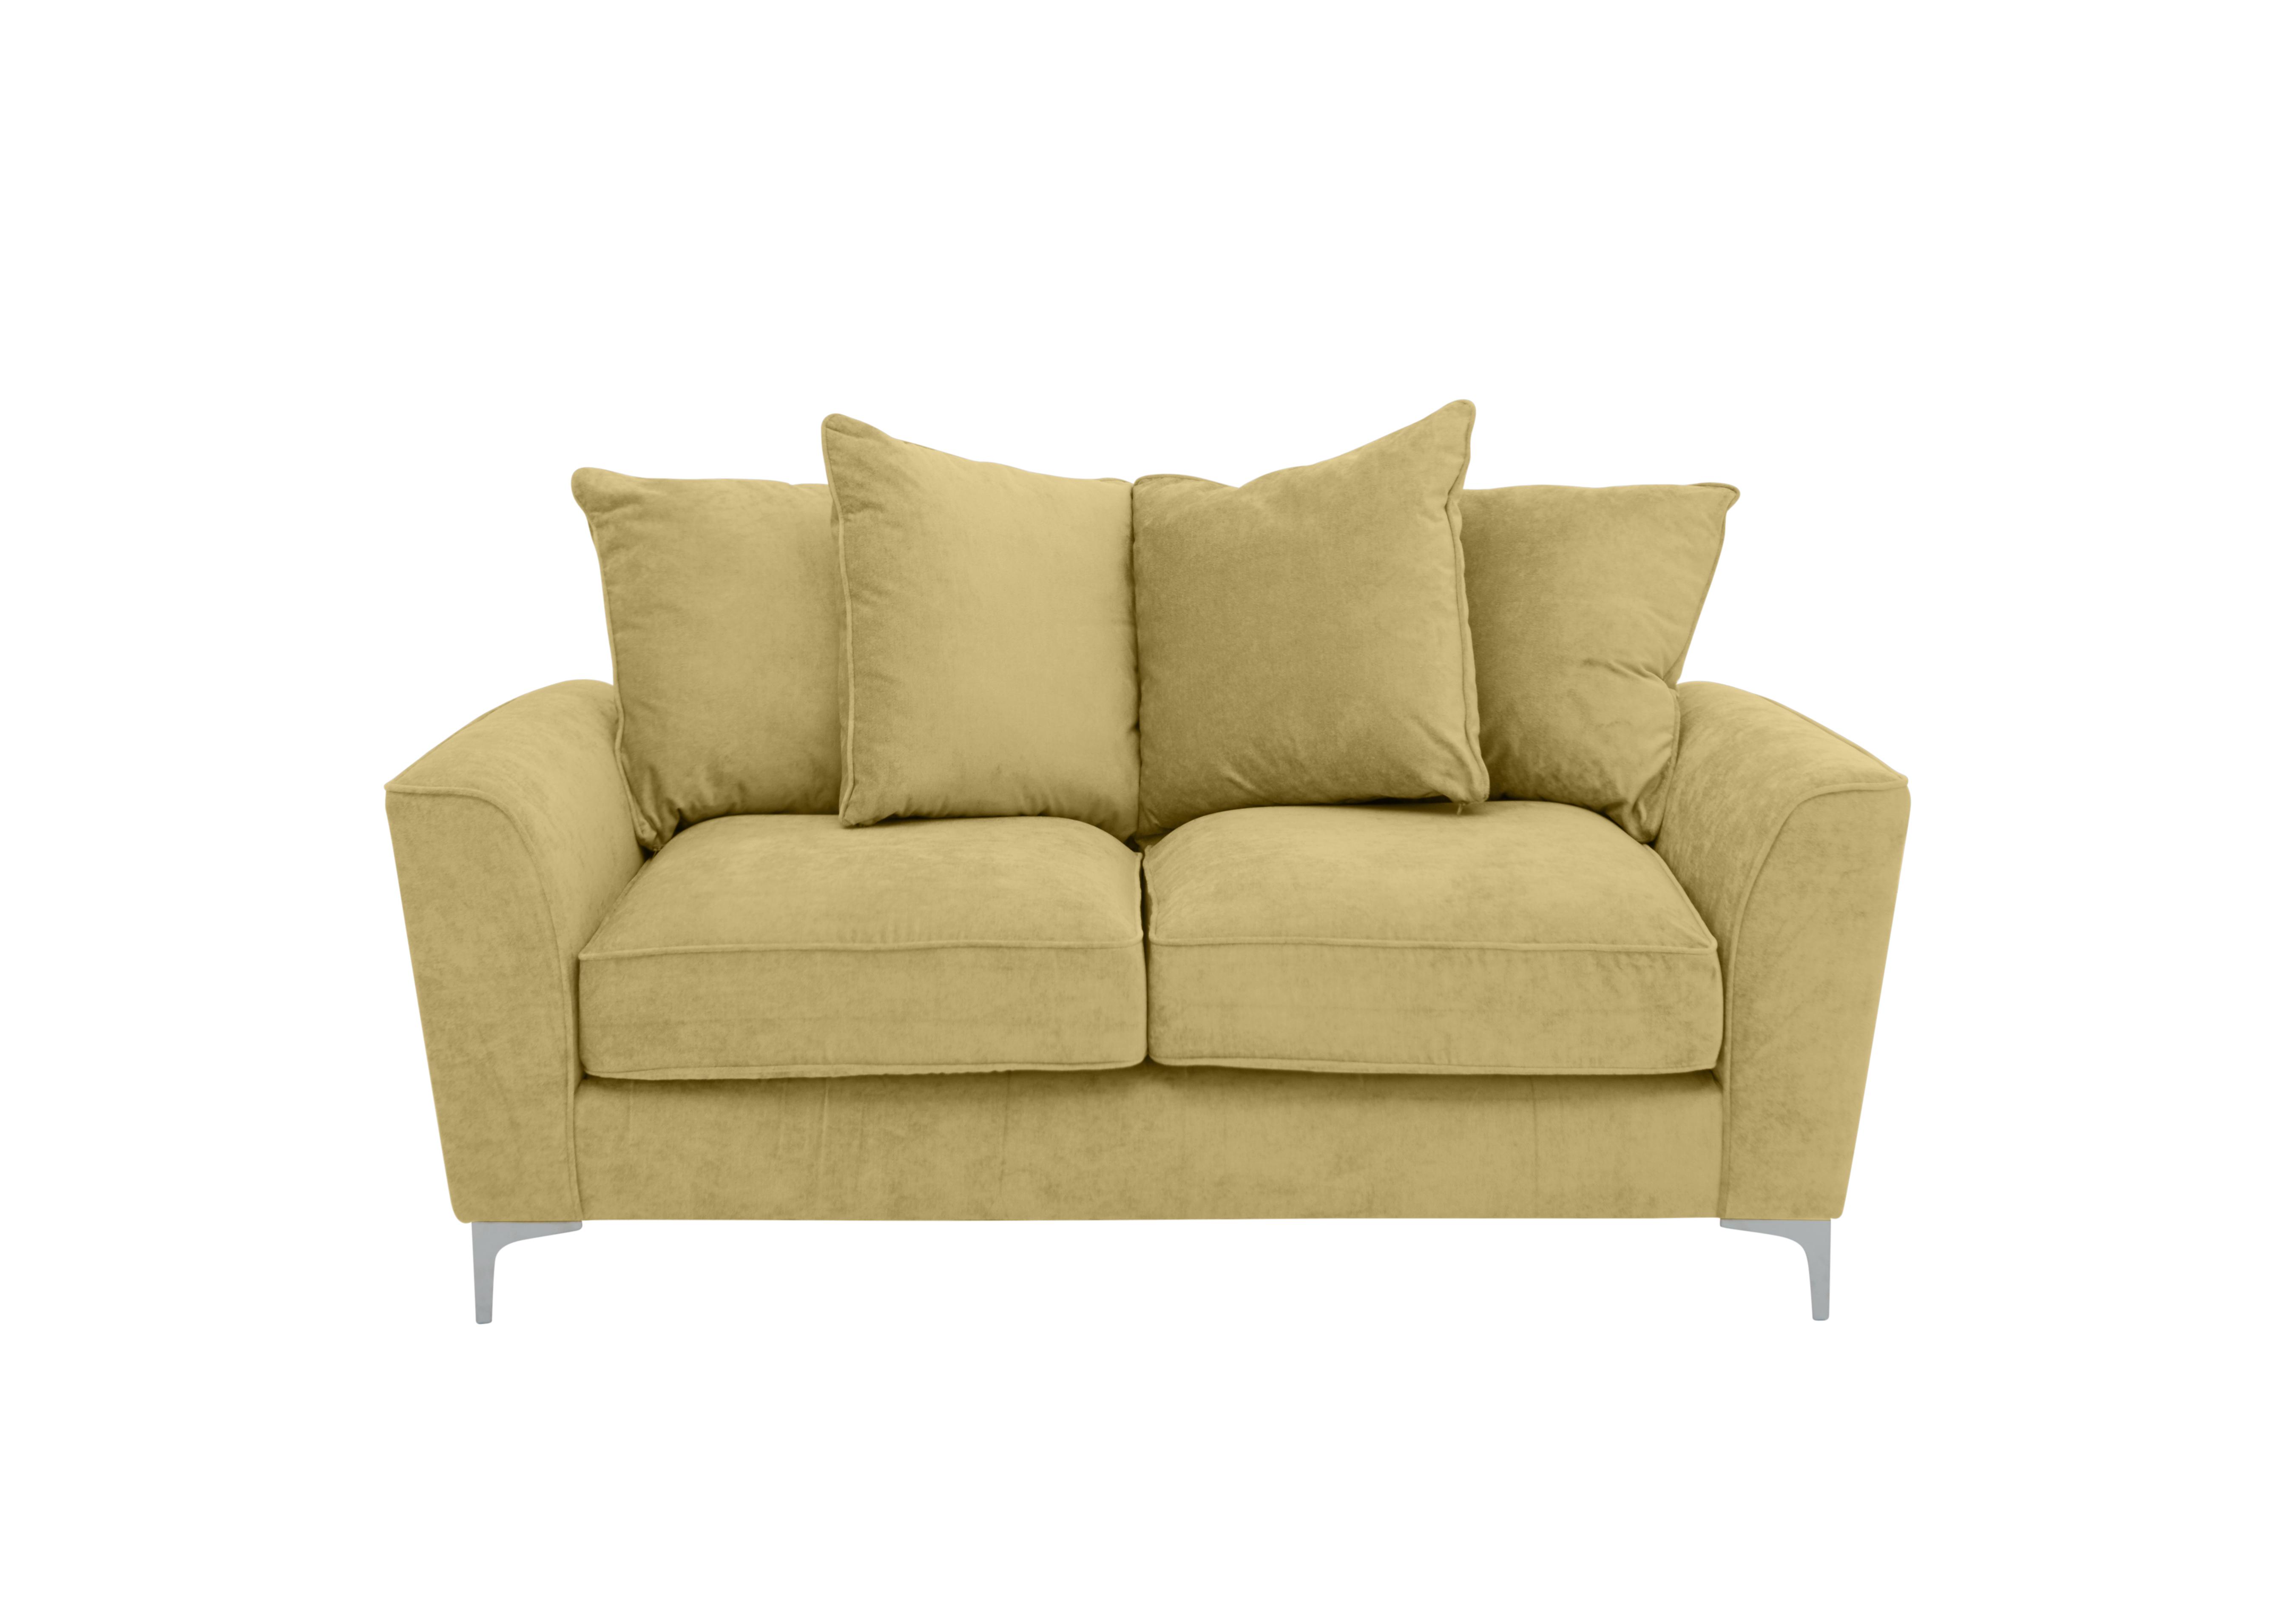 Legend 2 Seater Pillow Back Fabric Sofa in Cosmo Apple on Furniture Village